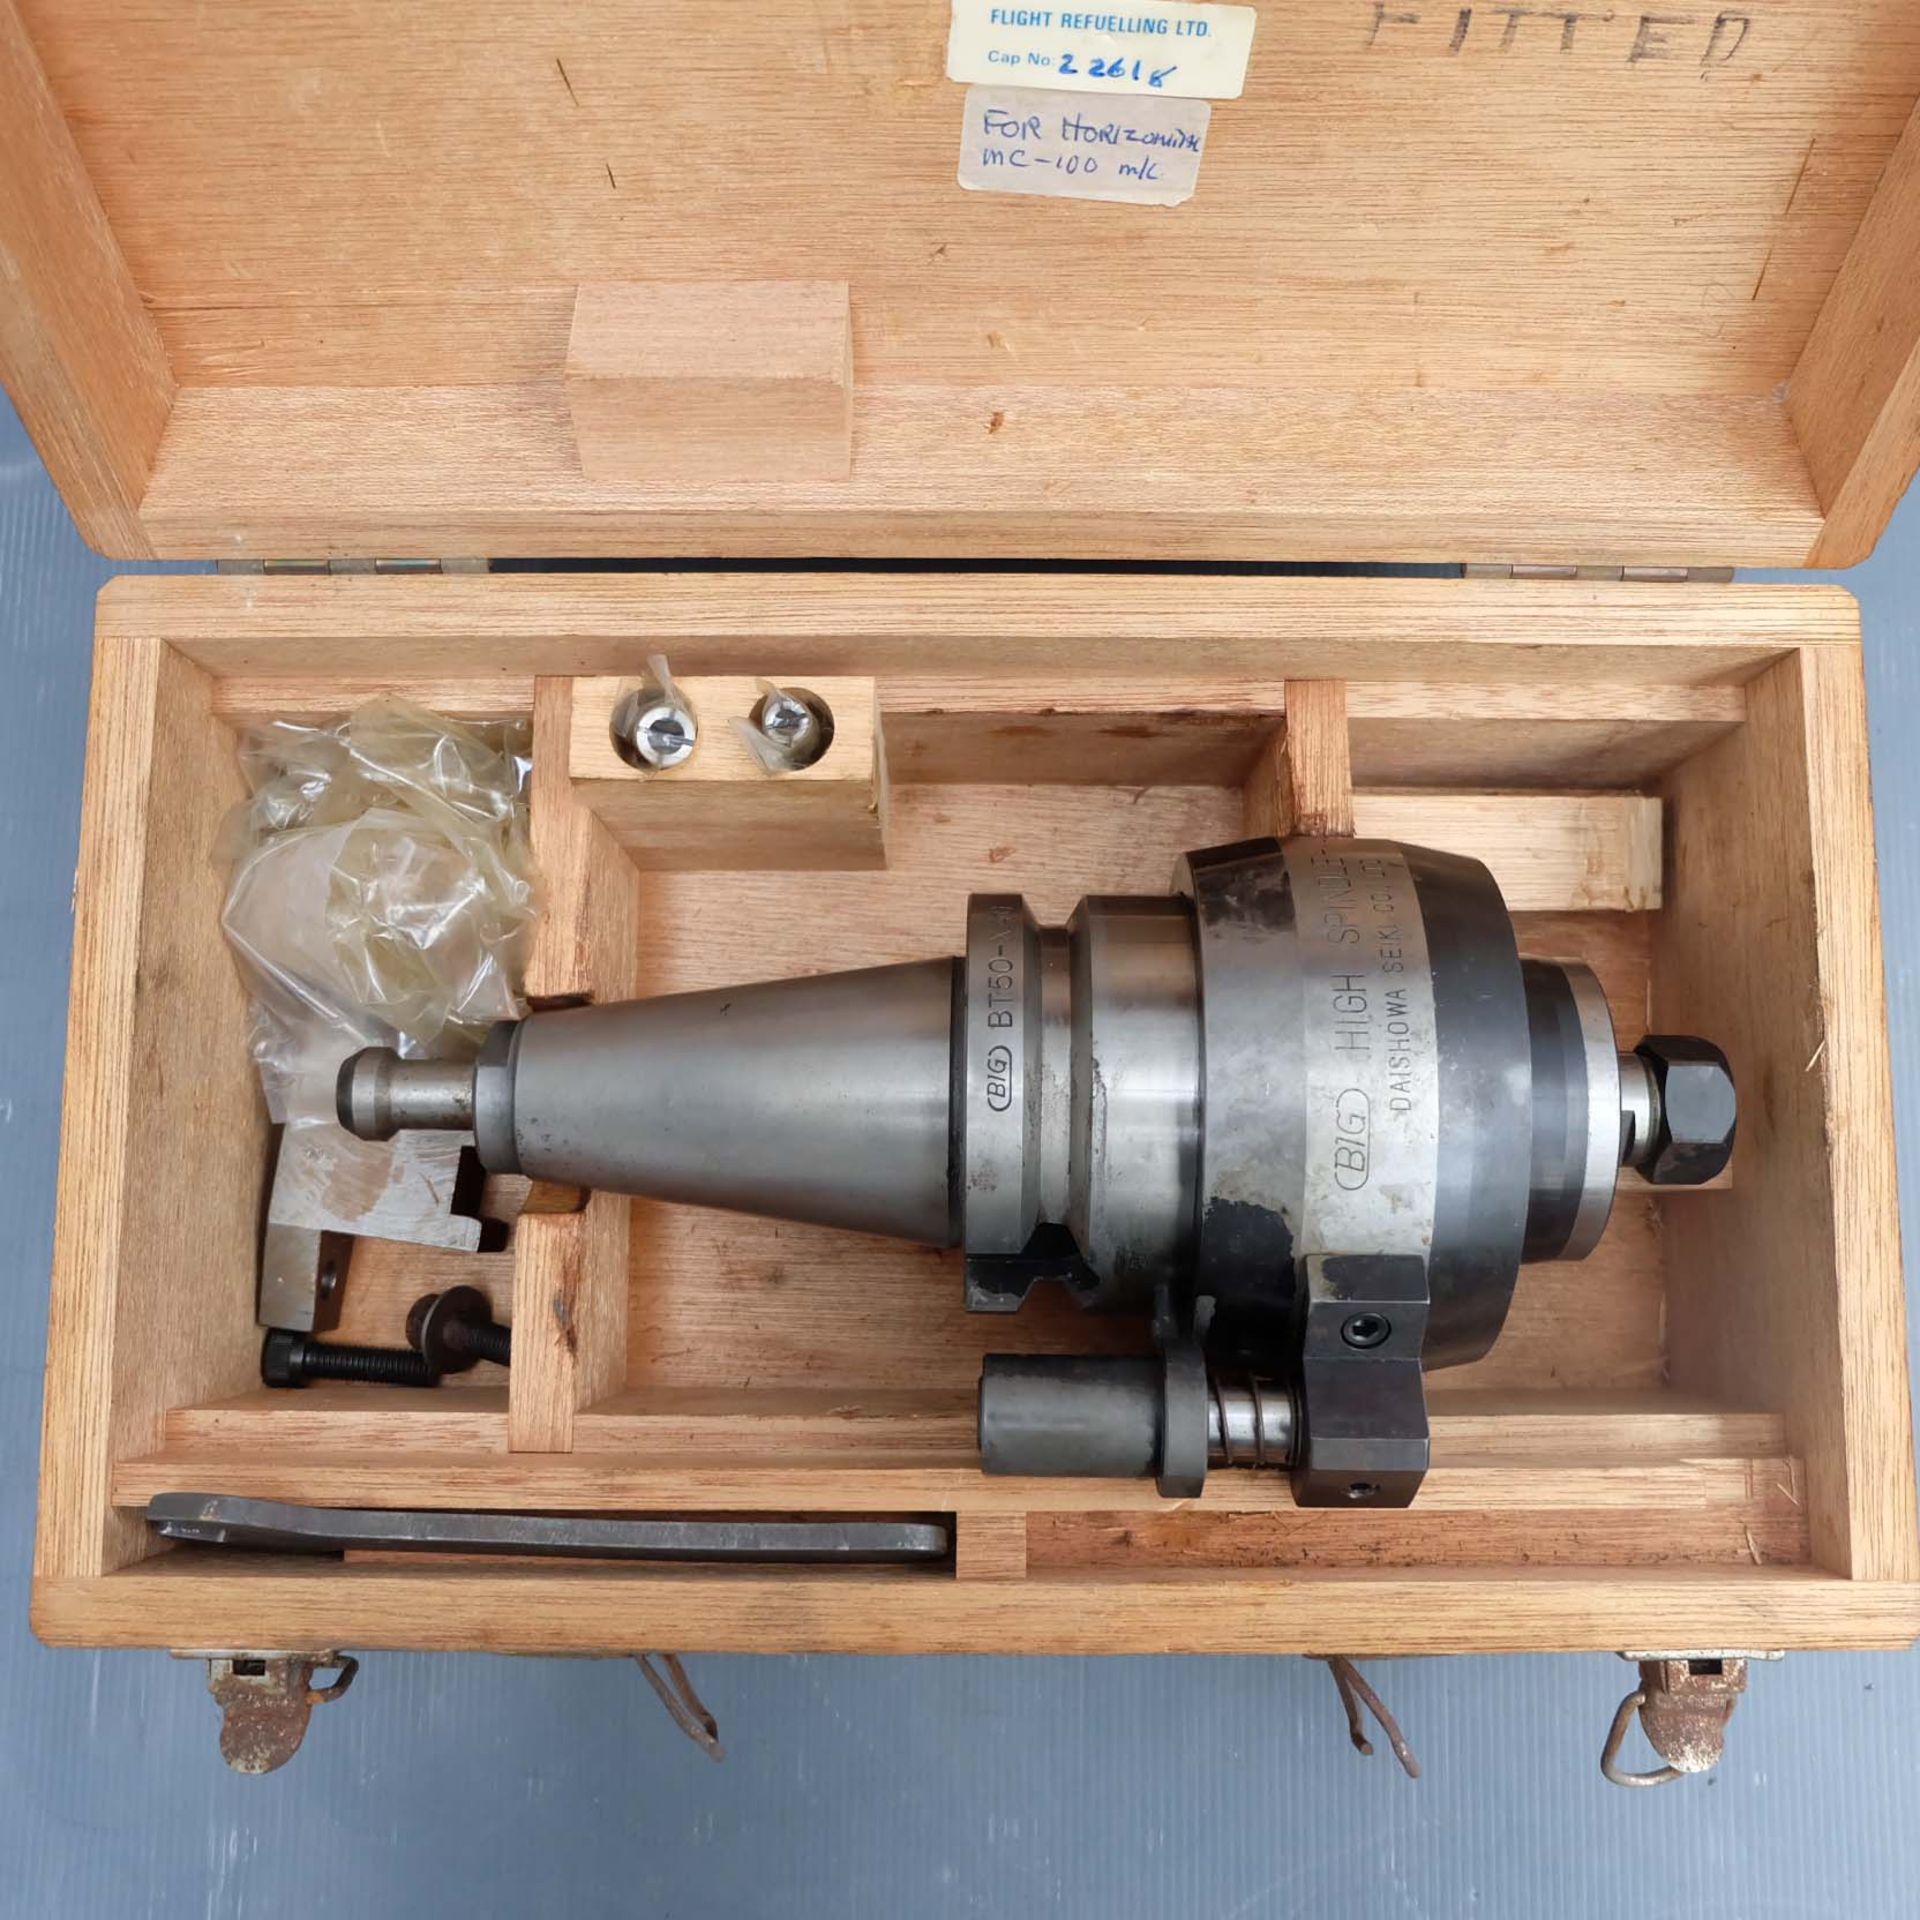 BIG High Spindle Speed Increaser - X4G By Daishower Seiki Co. Ltd With BT 50 Spindle In Wooden Box.